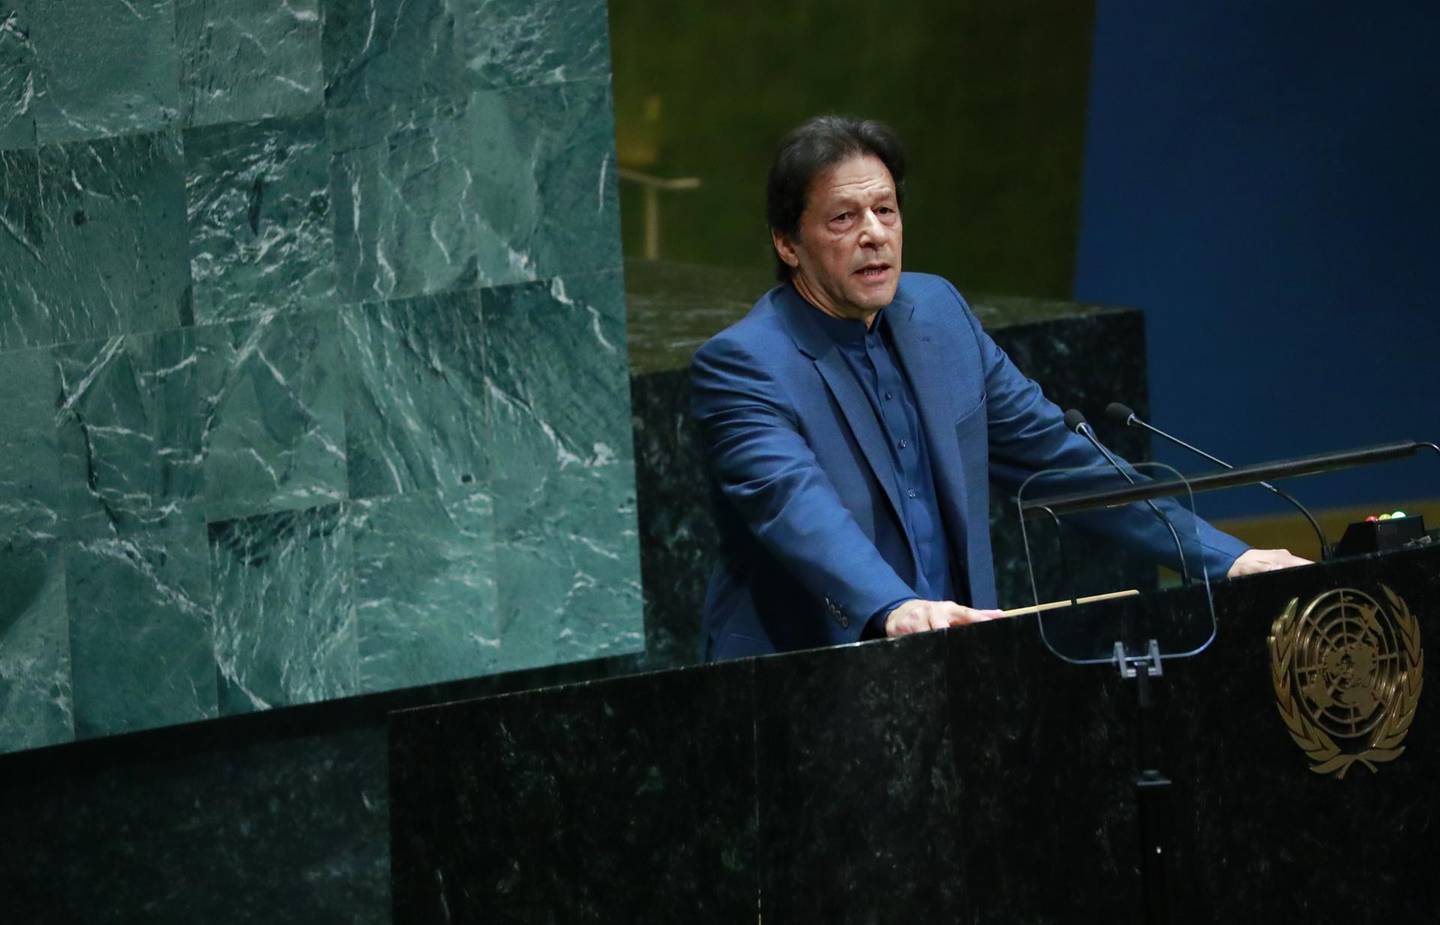 Imran Khan, Pakistan's prime minister, speaks during the UN General Assembly meeting in New York, U.S., on Friday, Sept. 27, 2019. Pakistan called on the Trump administration to do more to help ease tensions after India revoked autonomy in the disputed Muslim-majority state of Kashmir, a decision that has inflamed tensions between the two Asian powers.Photographer: Yana Paskova/Bloomberg